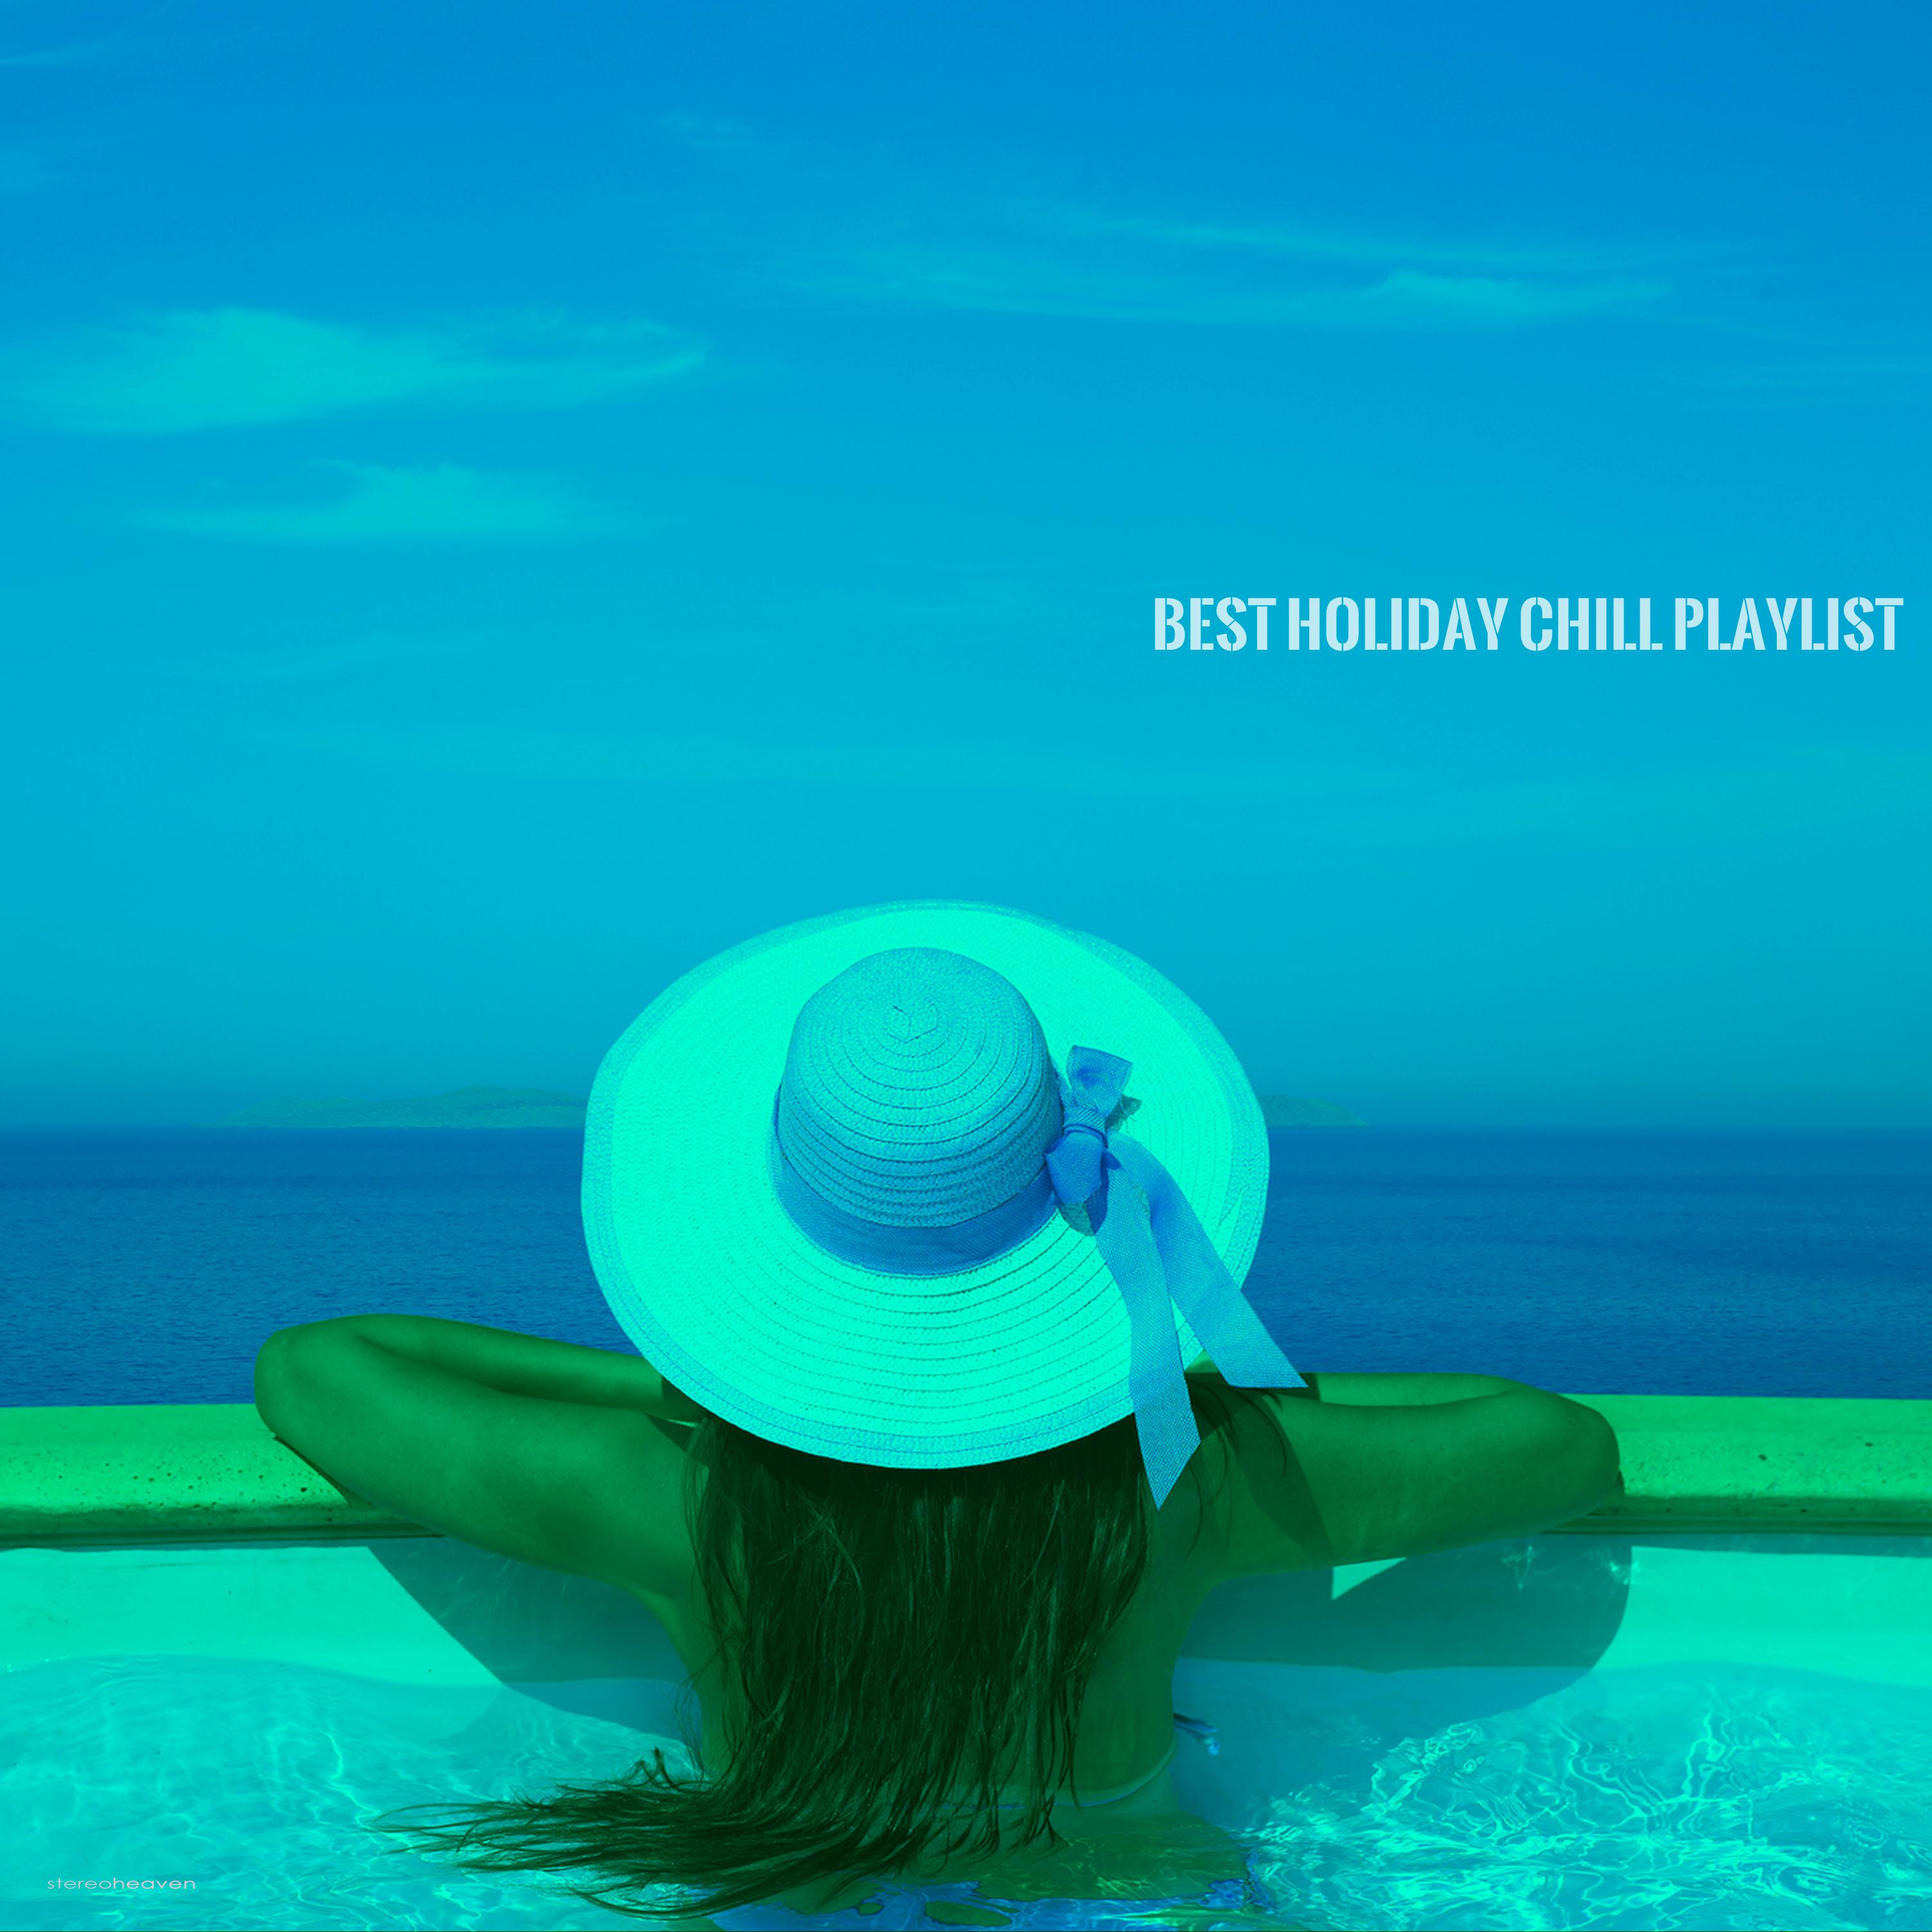 Best Holiday Chill Playlist